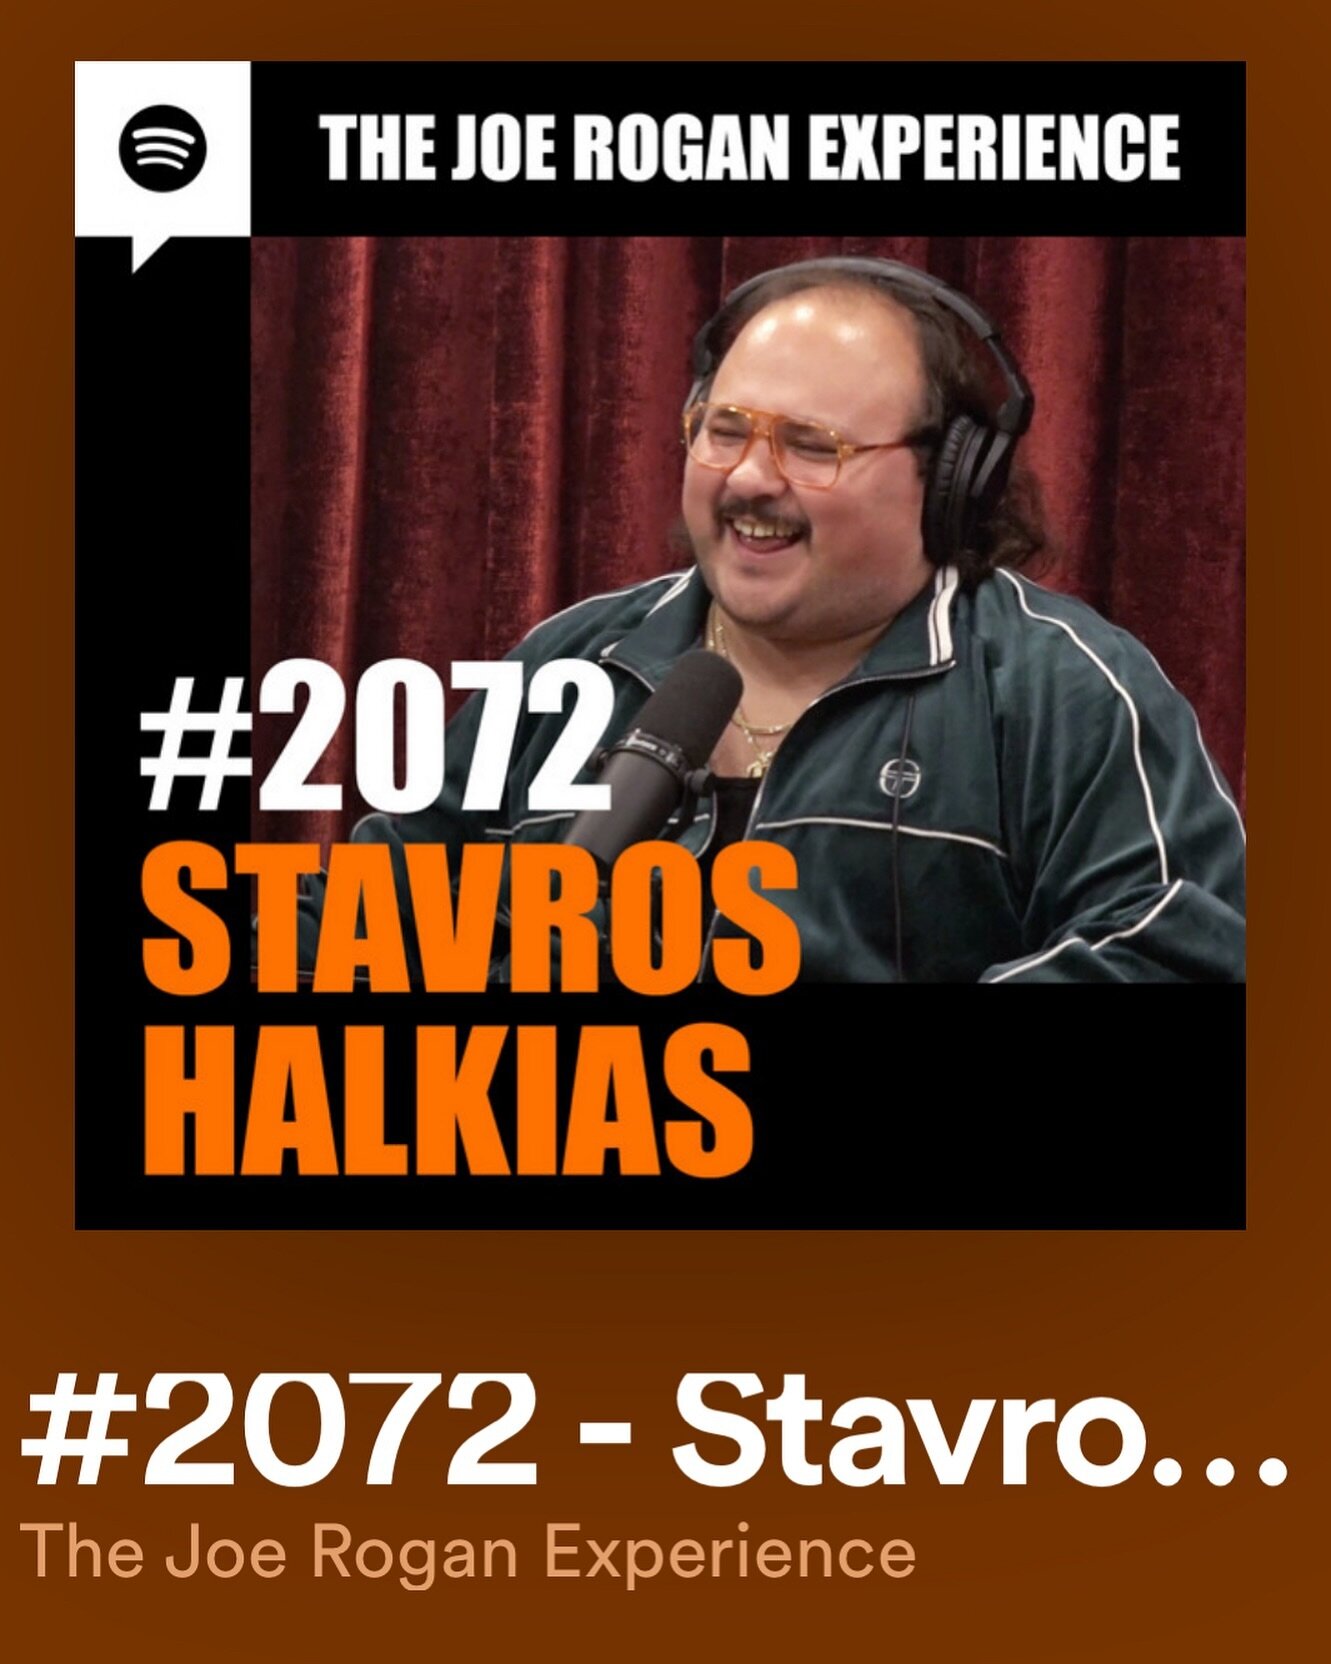 Haven&rsquo;t laughed so much in a long time. @stavvysworld (Stavros Halkias) is a really funny dude and his laugh is so gottam infectious.
Going to check out more of his shite.